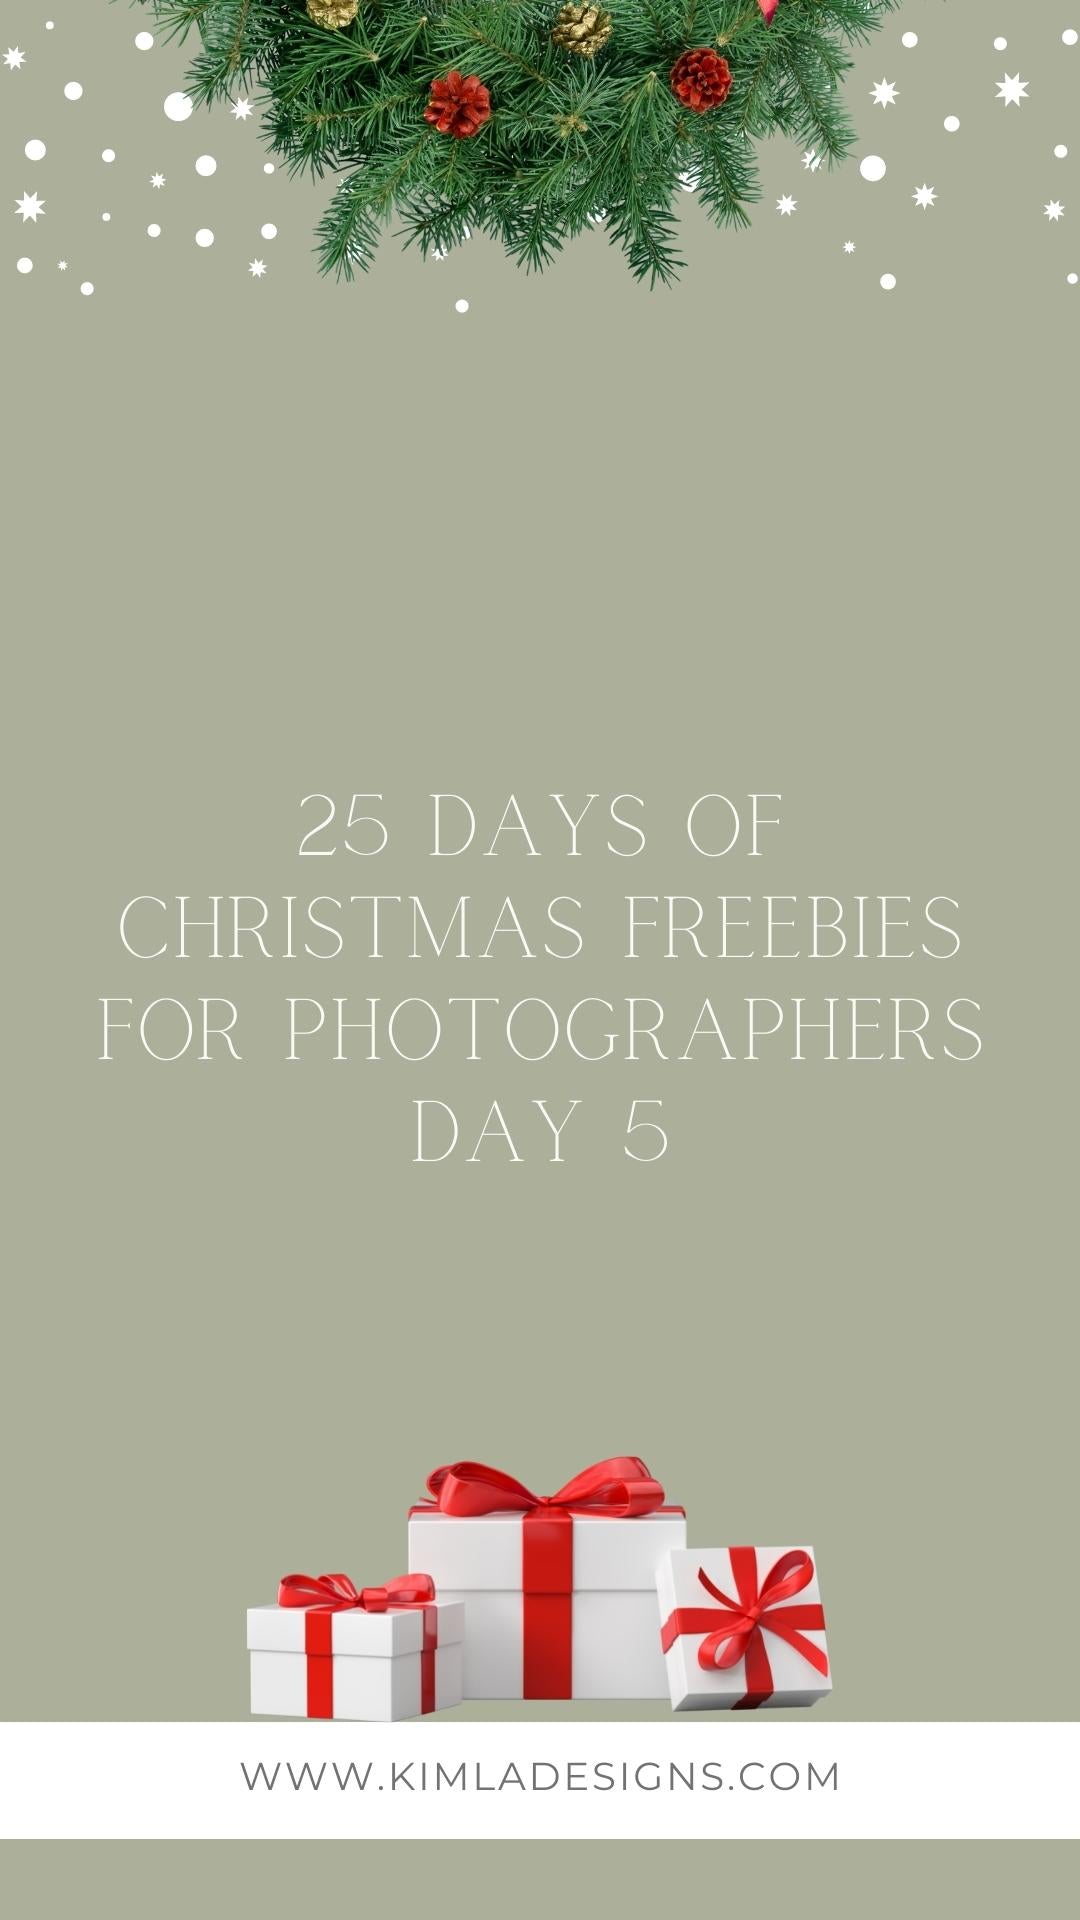 25 Days of Christmas Freebies Day 5th